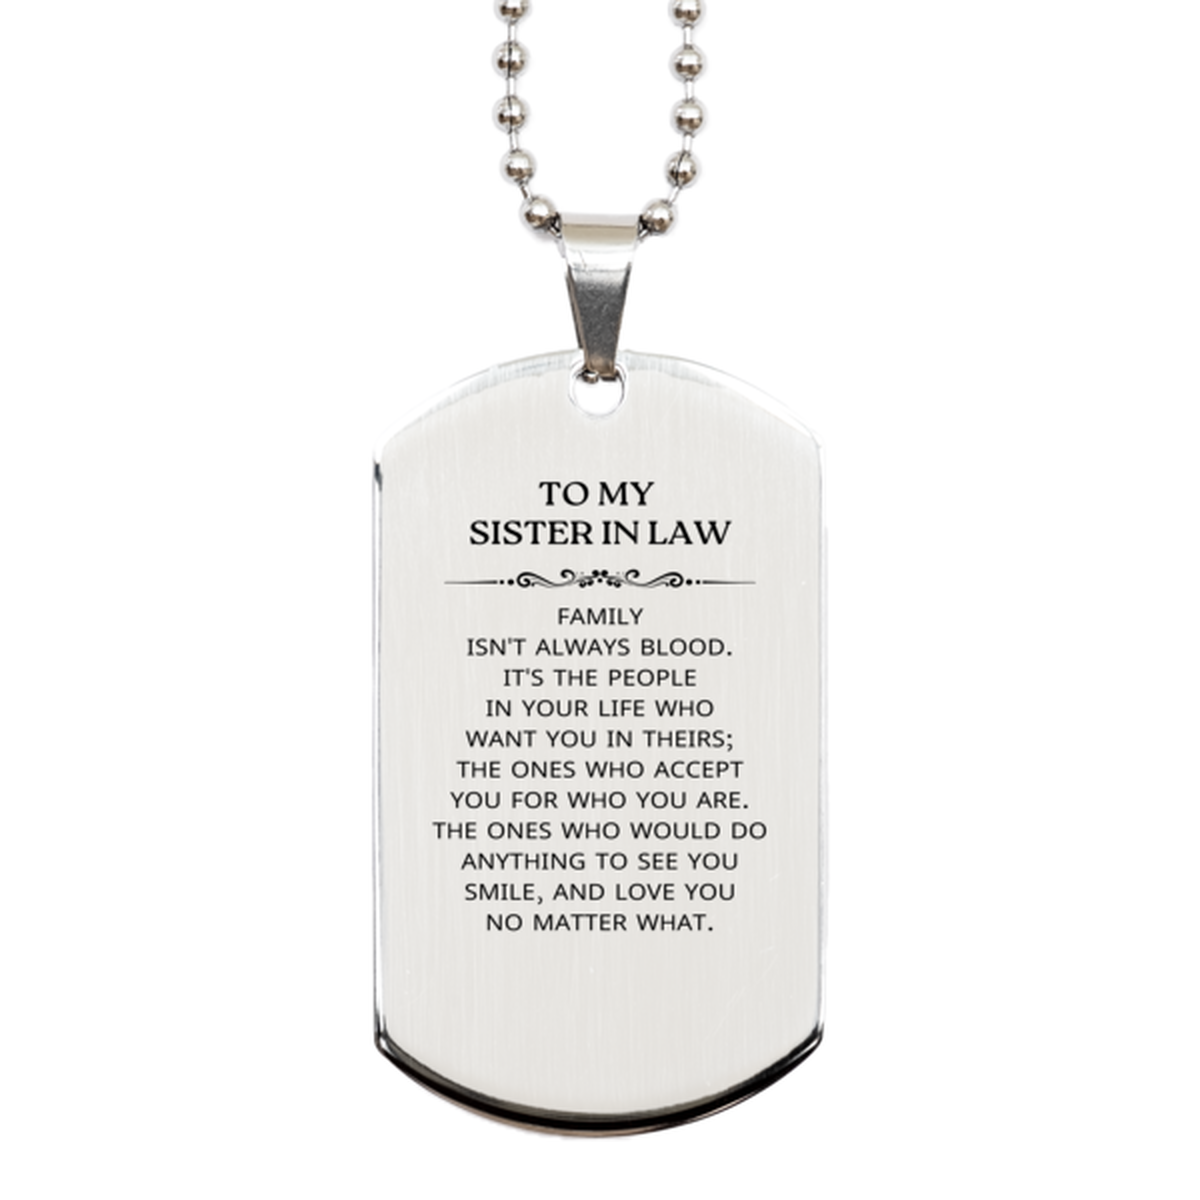 To My Sister In Law Gifts, Family isn't always blood, Sister In Law Silver Dog Tag, Birthday Christmas Unique Present For Sister In Law